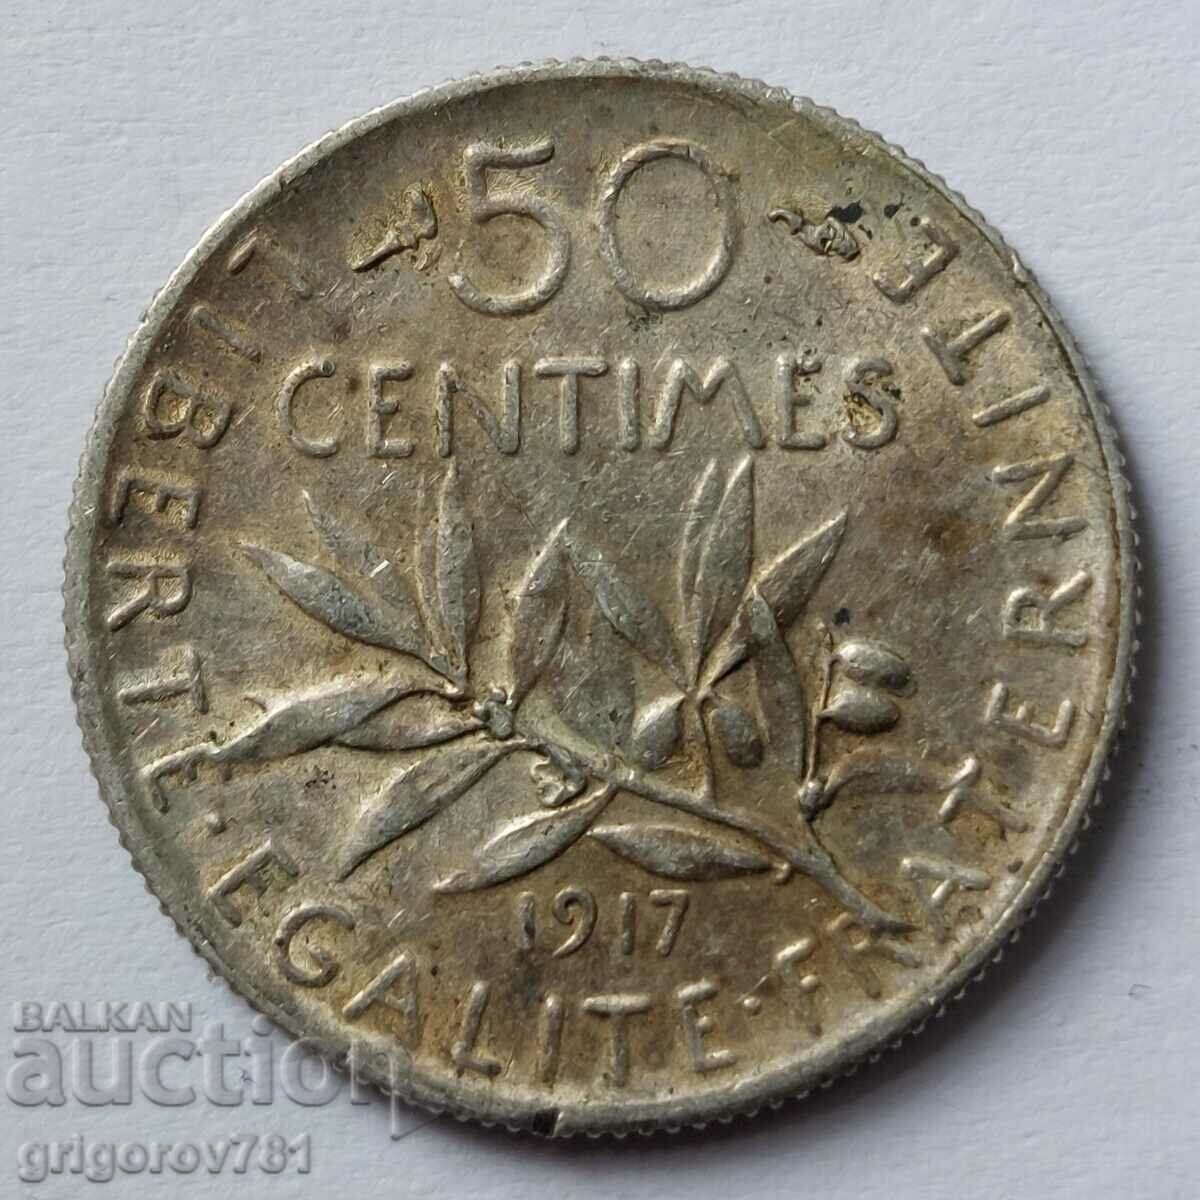 50 centimes silver France 1917 - silver coin №20